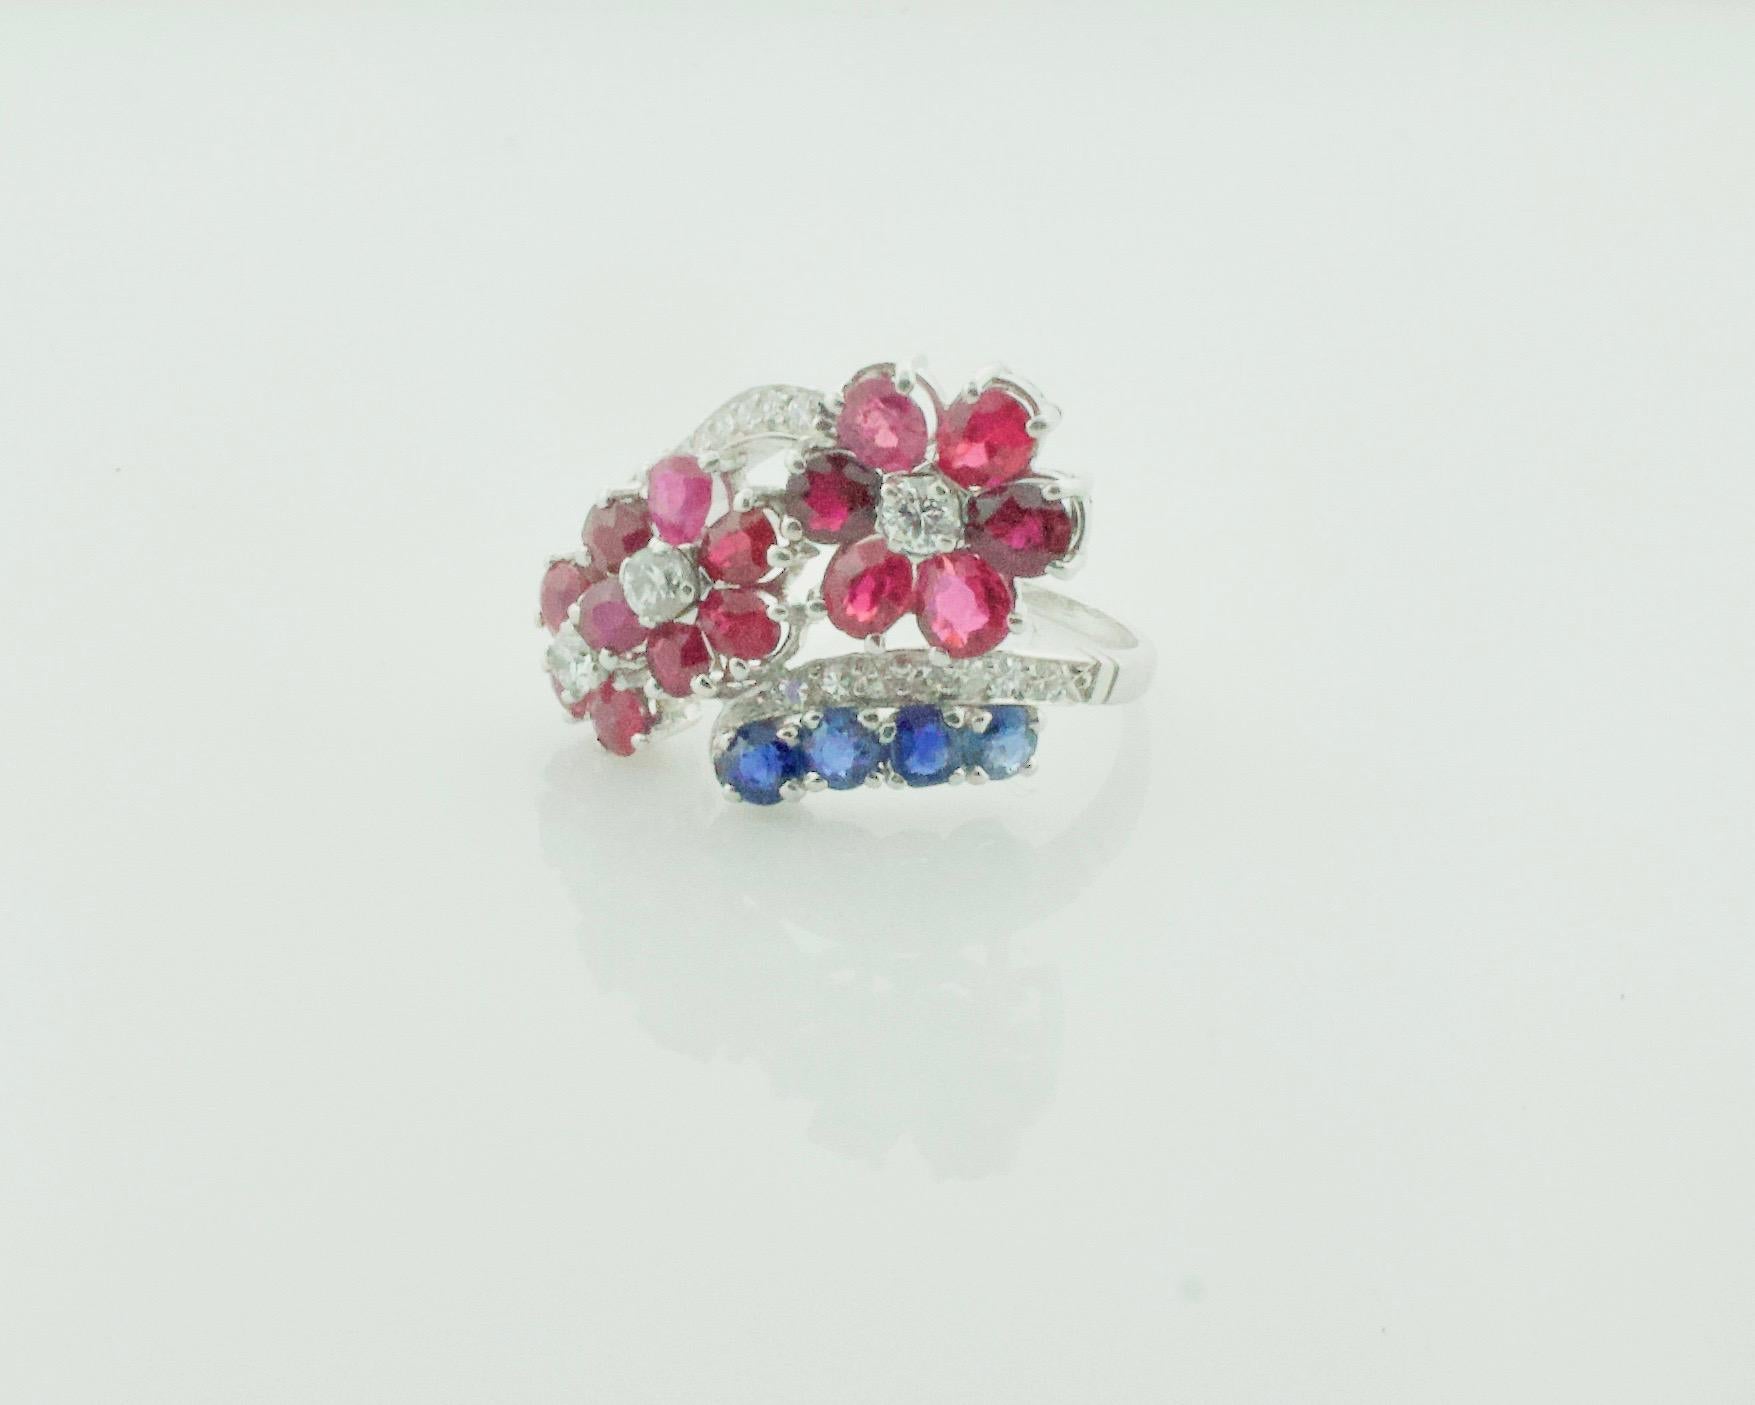 Red, White and Blue Ruby, Sapphire and Diamond Ring in Platinum Circa 1940's
Fifteen Round and Pear Shape Rubies Weighing 3.00 Carats Approximately 
Three Round Sapphires Weighing .60 Carats Approximately 
Three Round Cut Diamonds Weighing .30